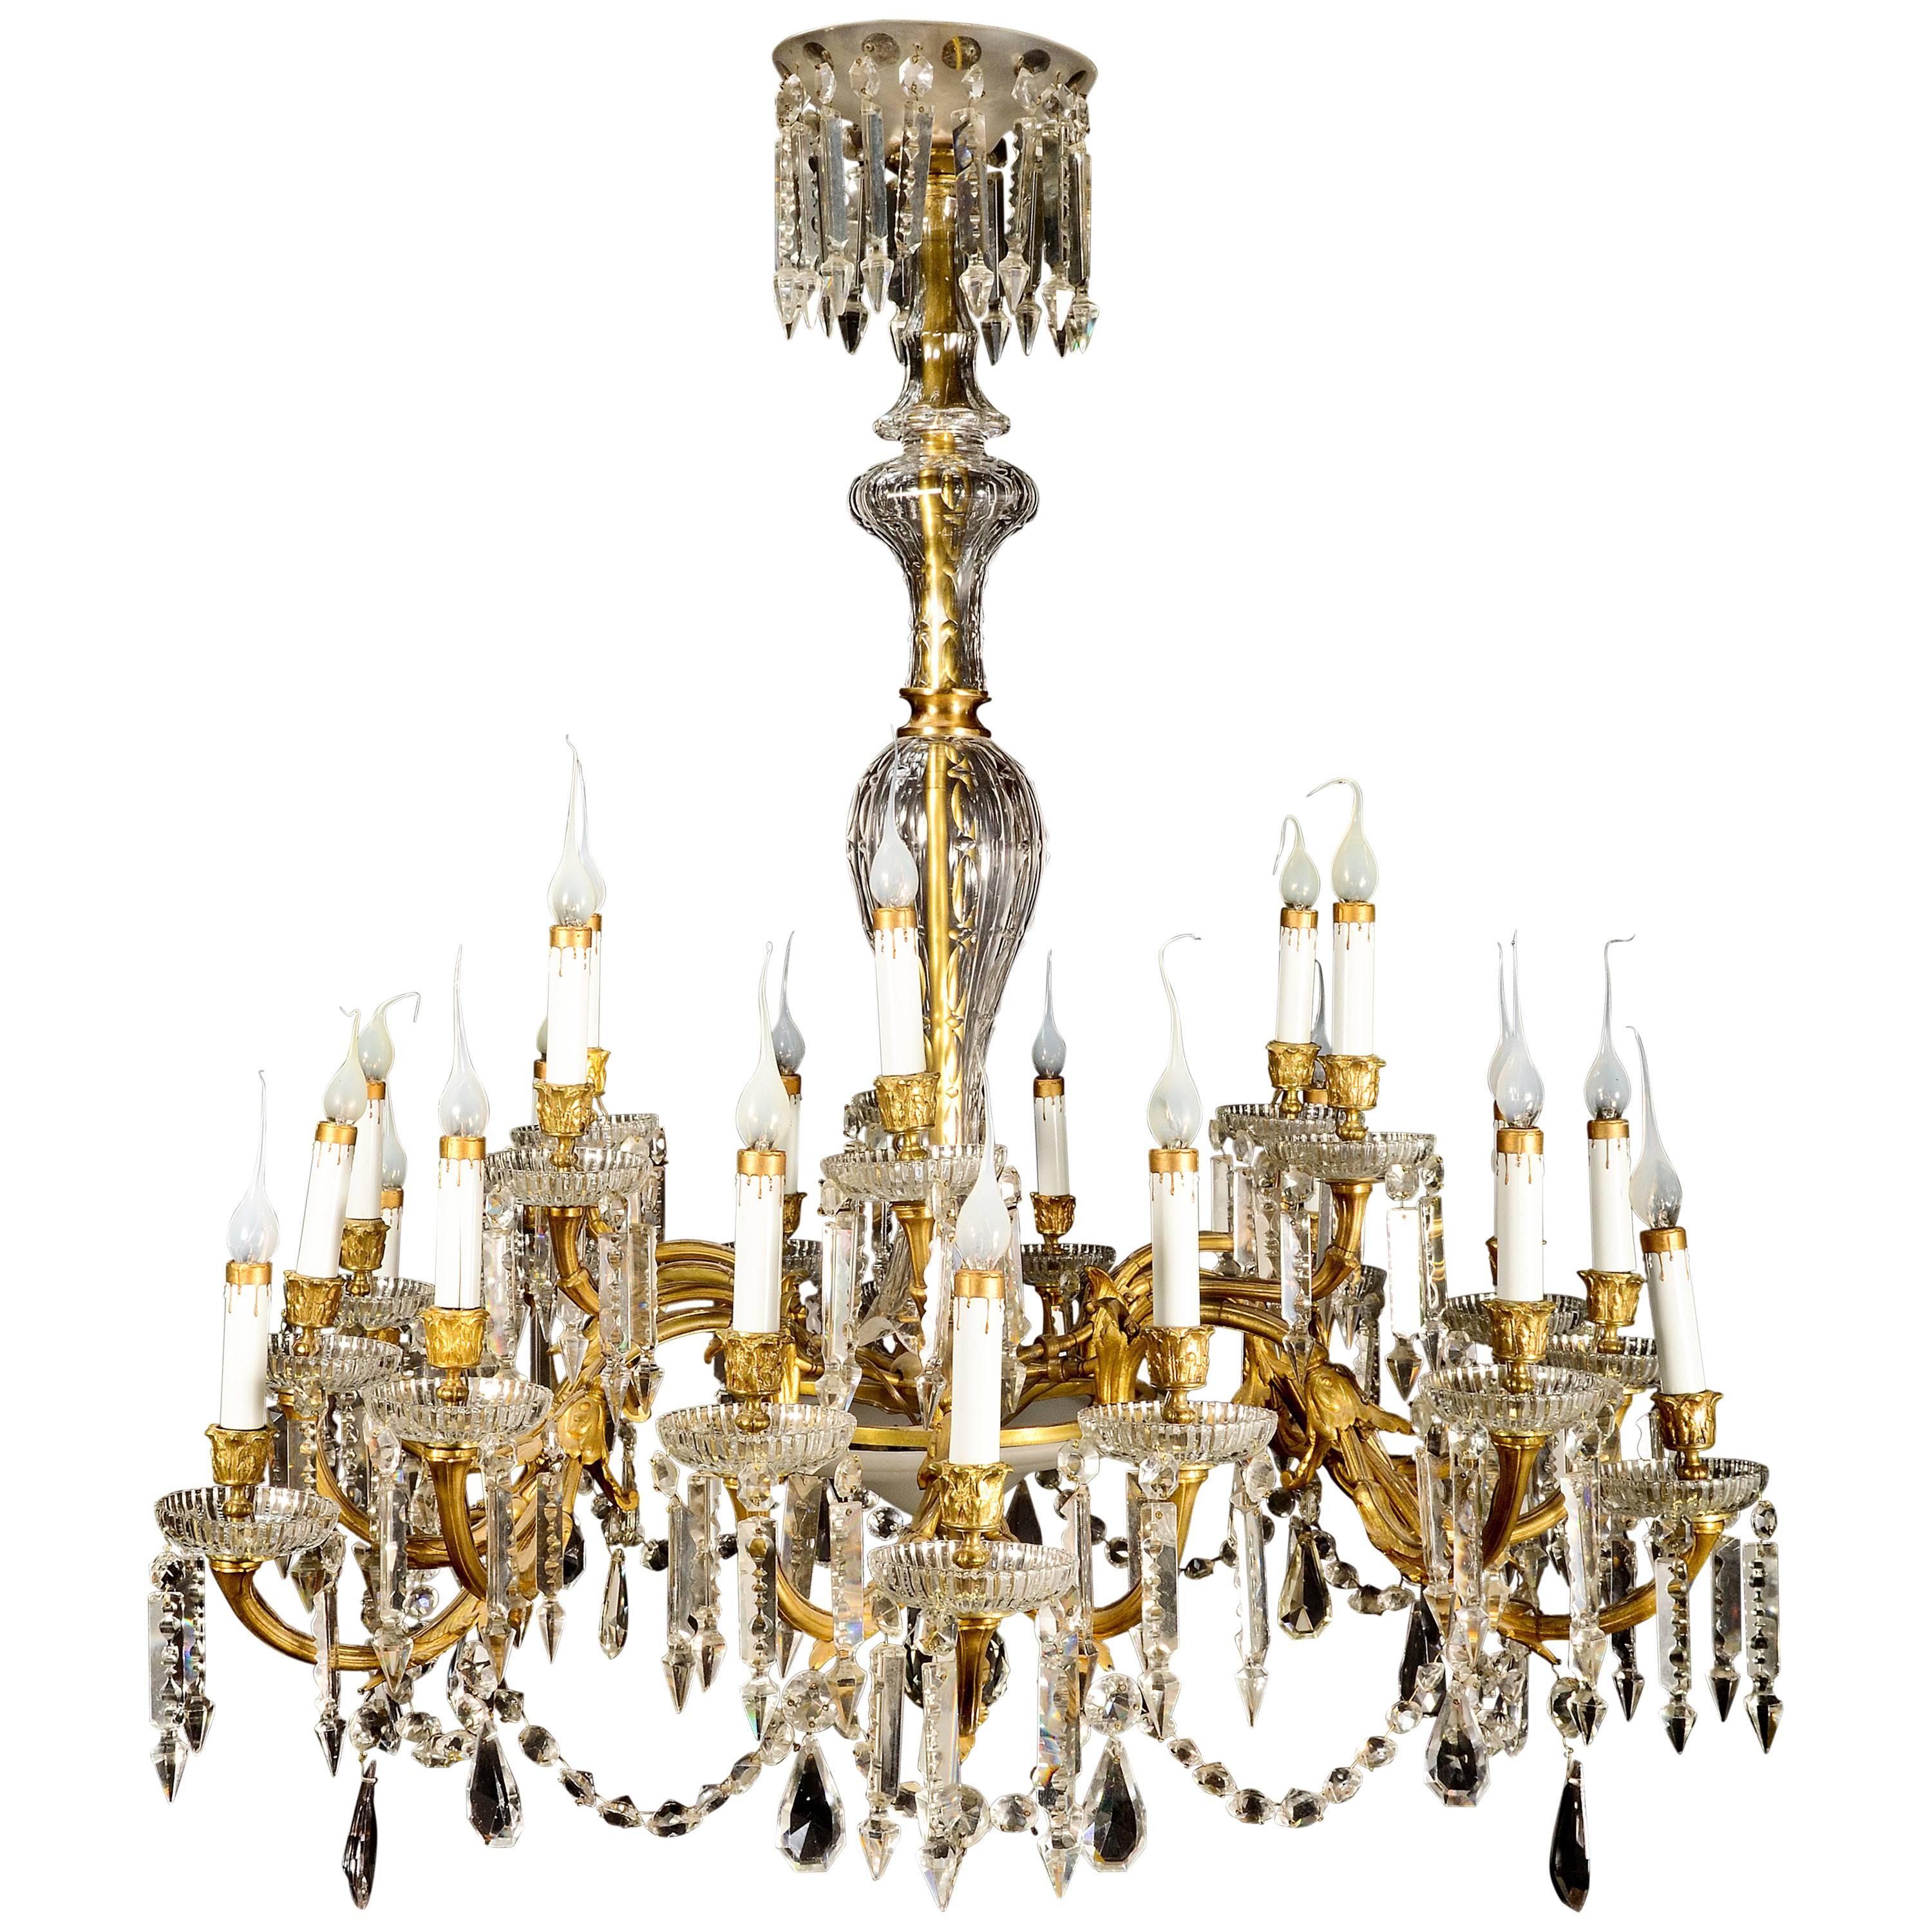 Antique French Louis XVI Style Gilt Bronze and Crystal 24-Arm Chandelier